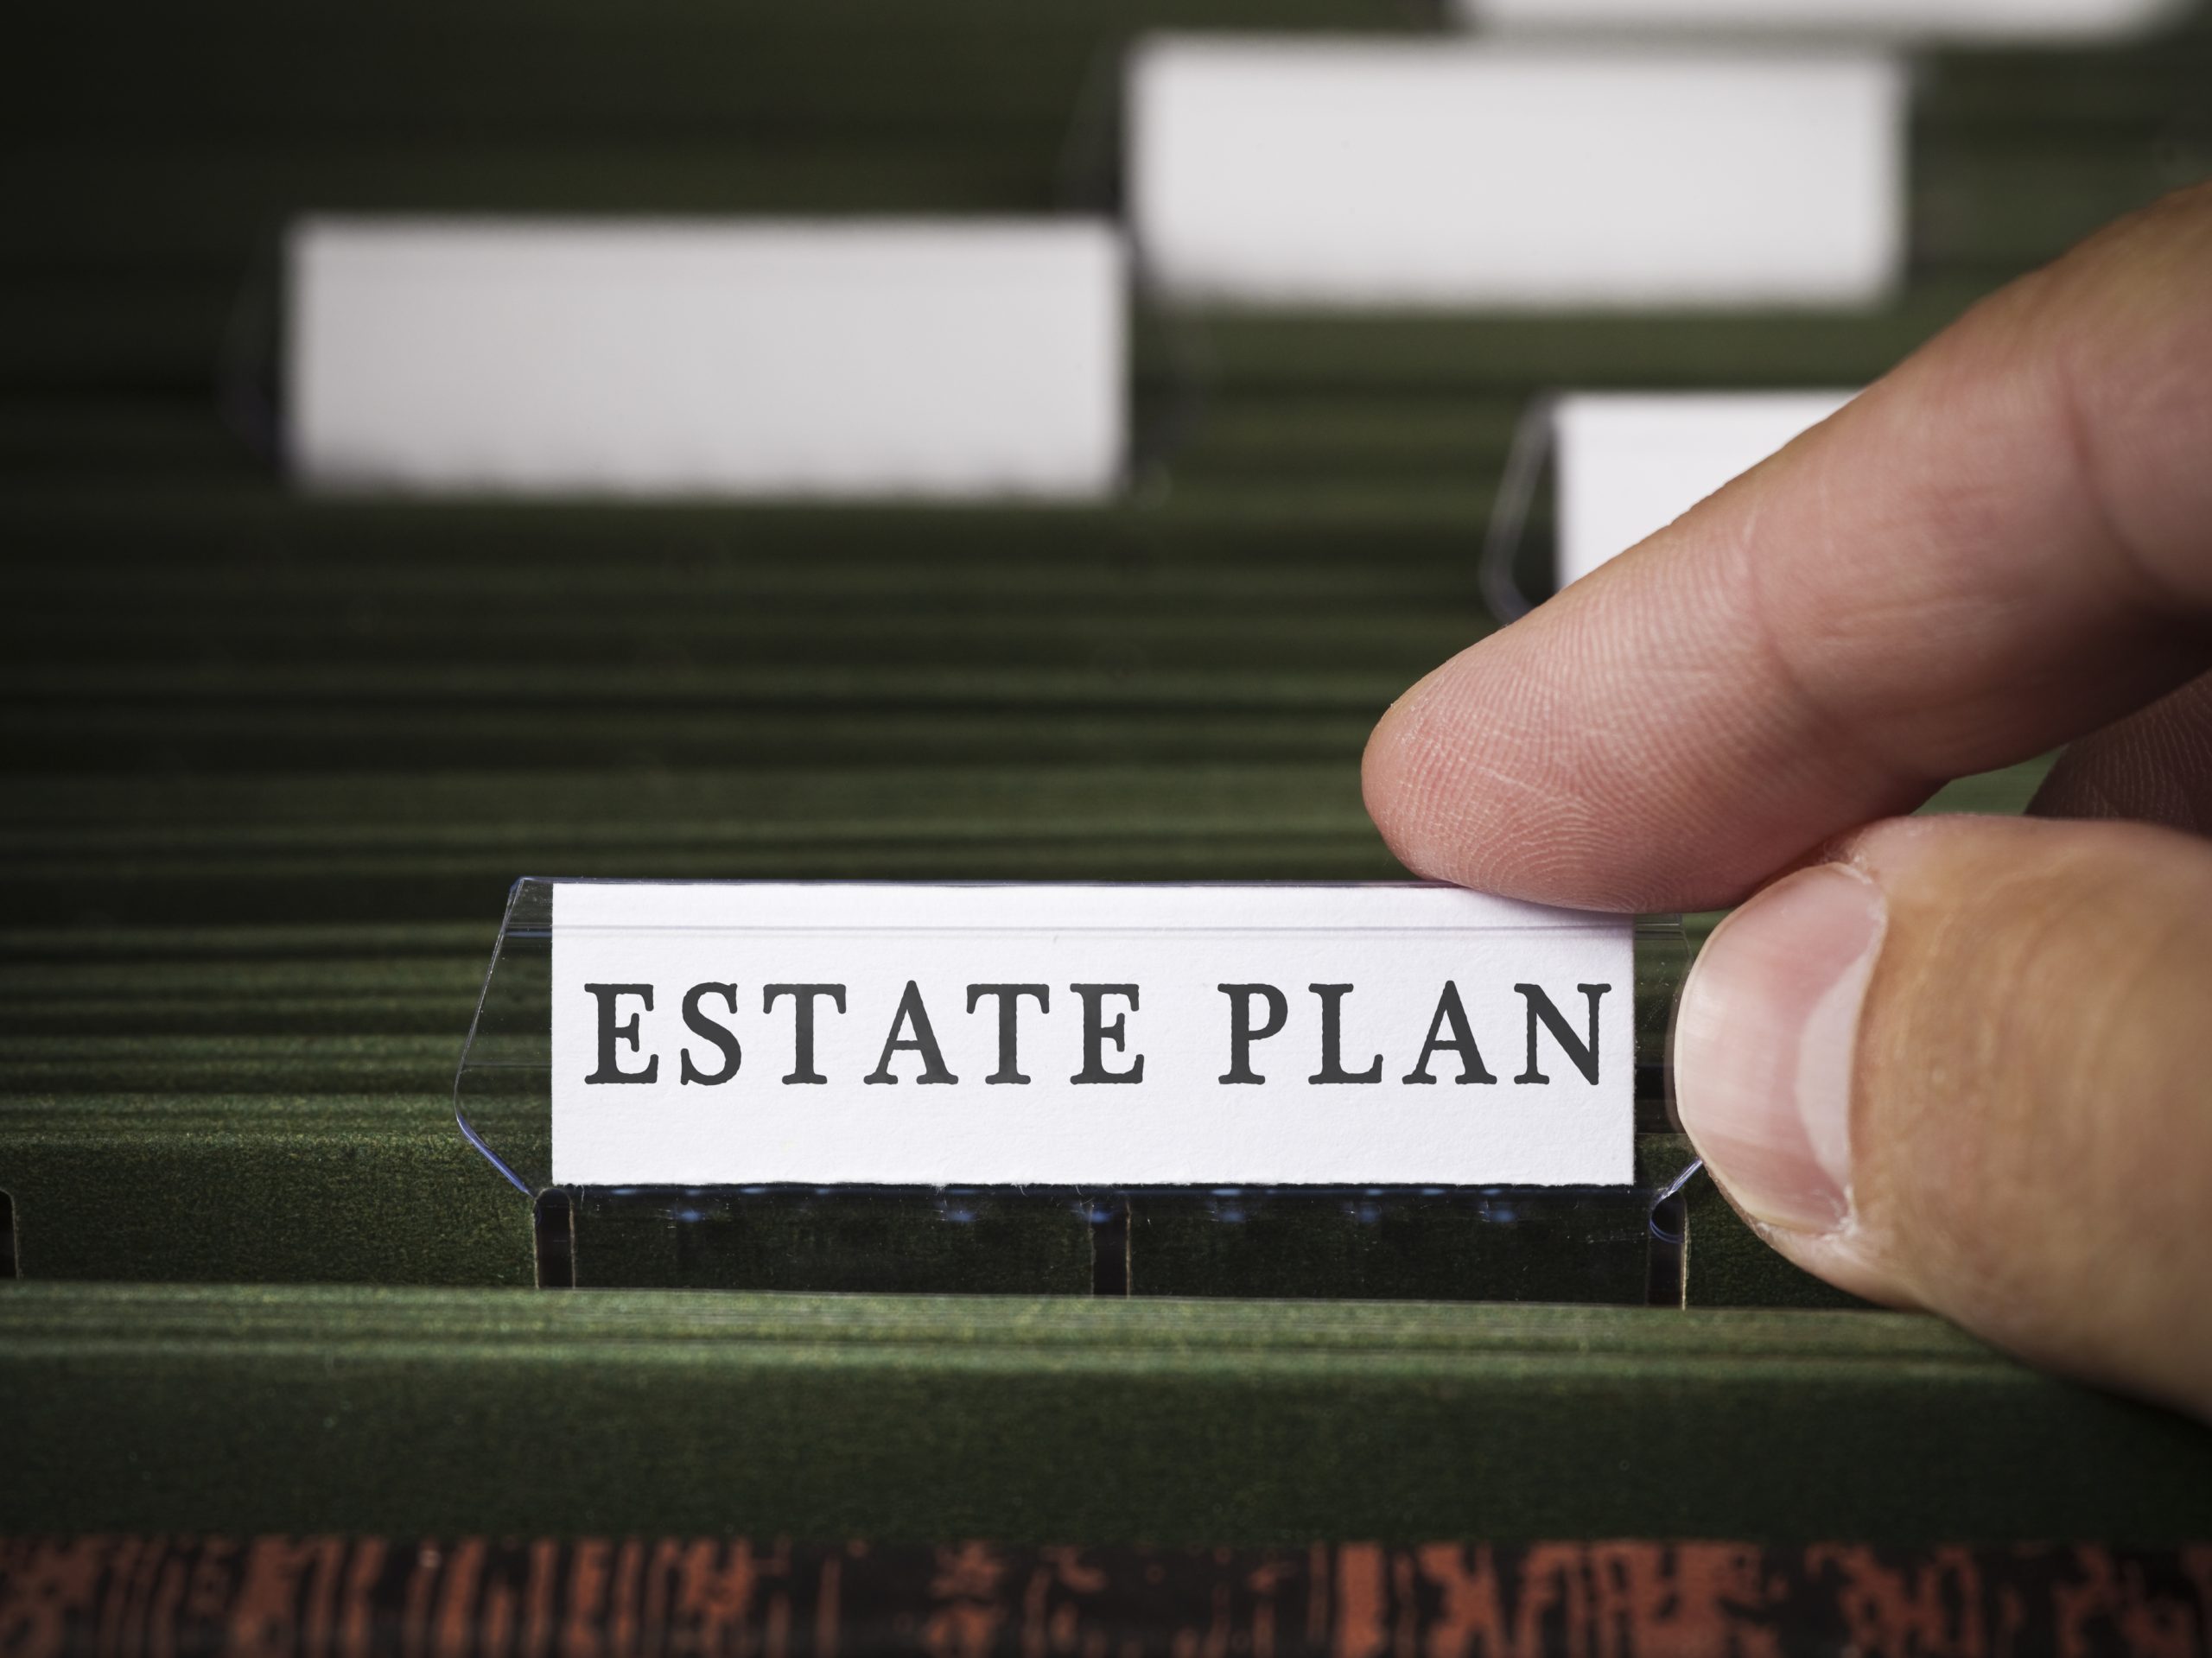 3 Quick Suggestions for Planning Your Estate Miles Financial Group